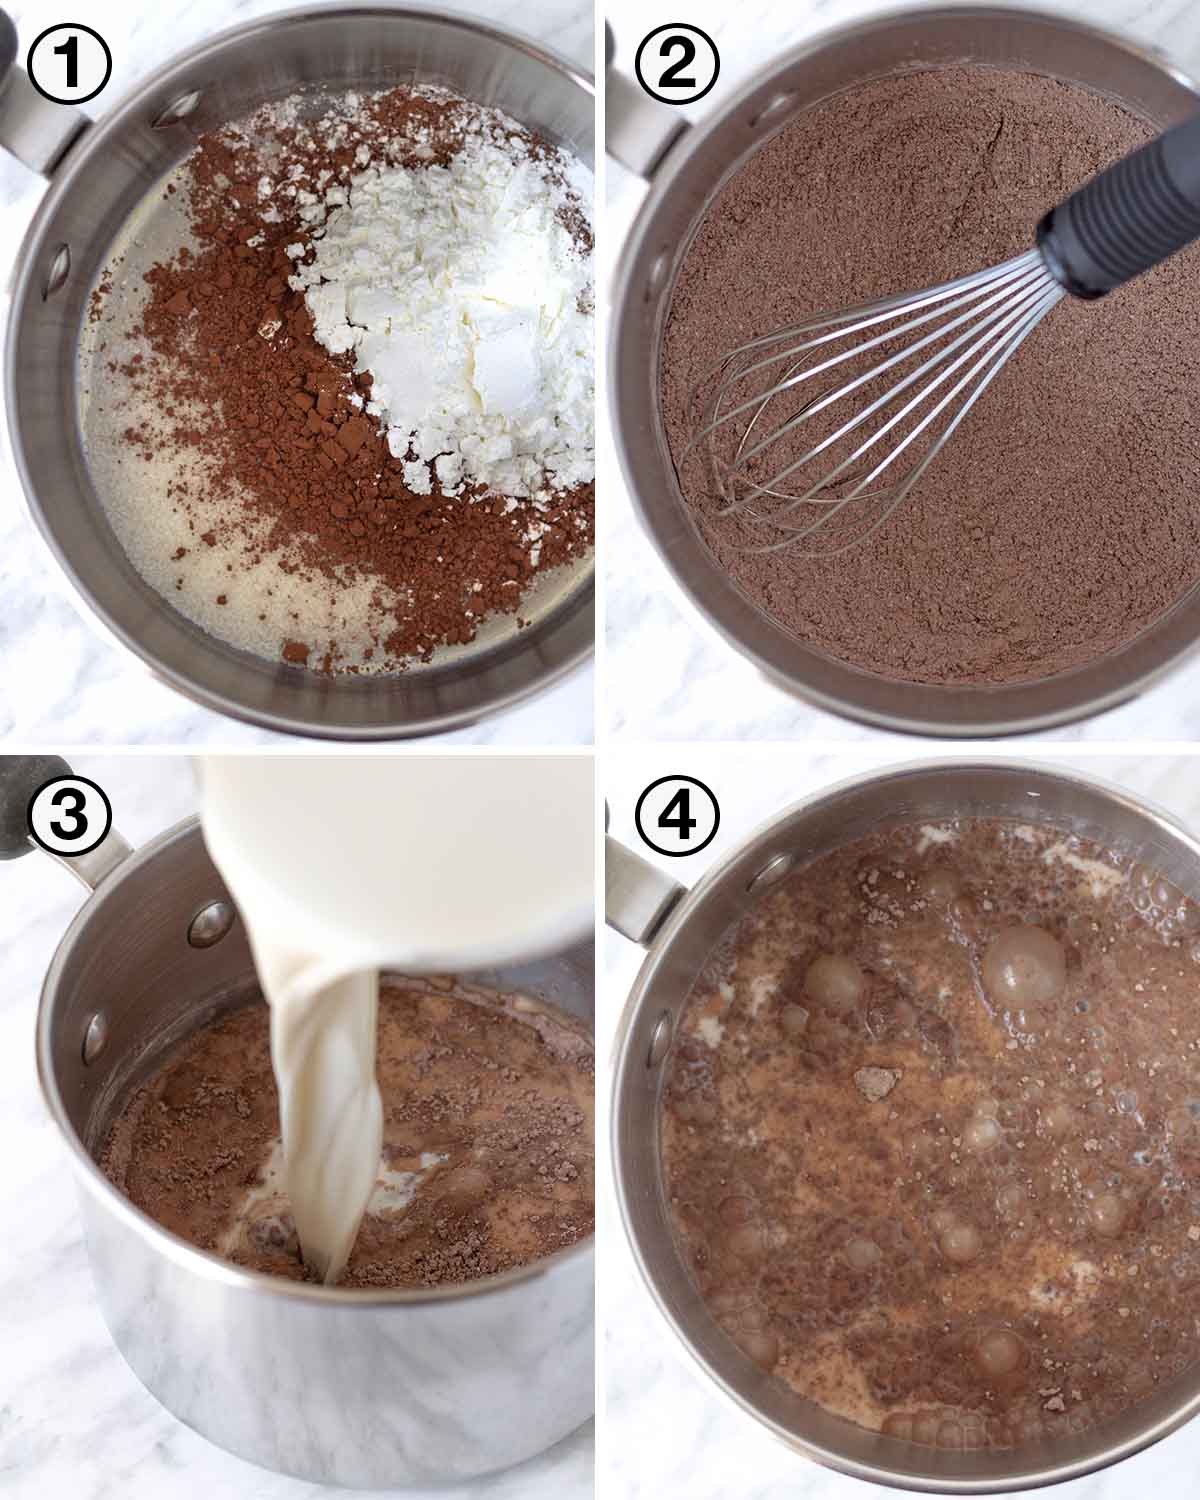 A collage of four images showing the first sequence of steps needed to make vegan chocolate pudding.